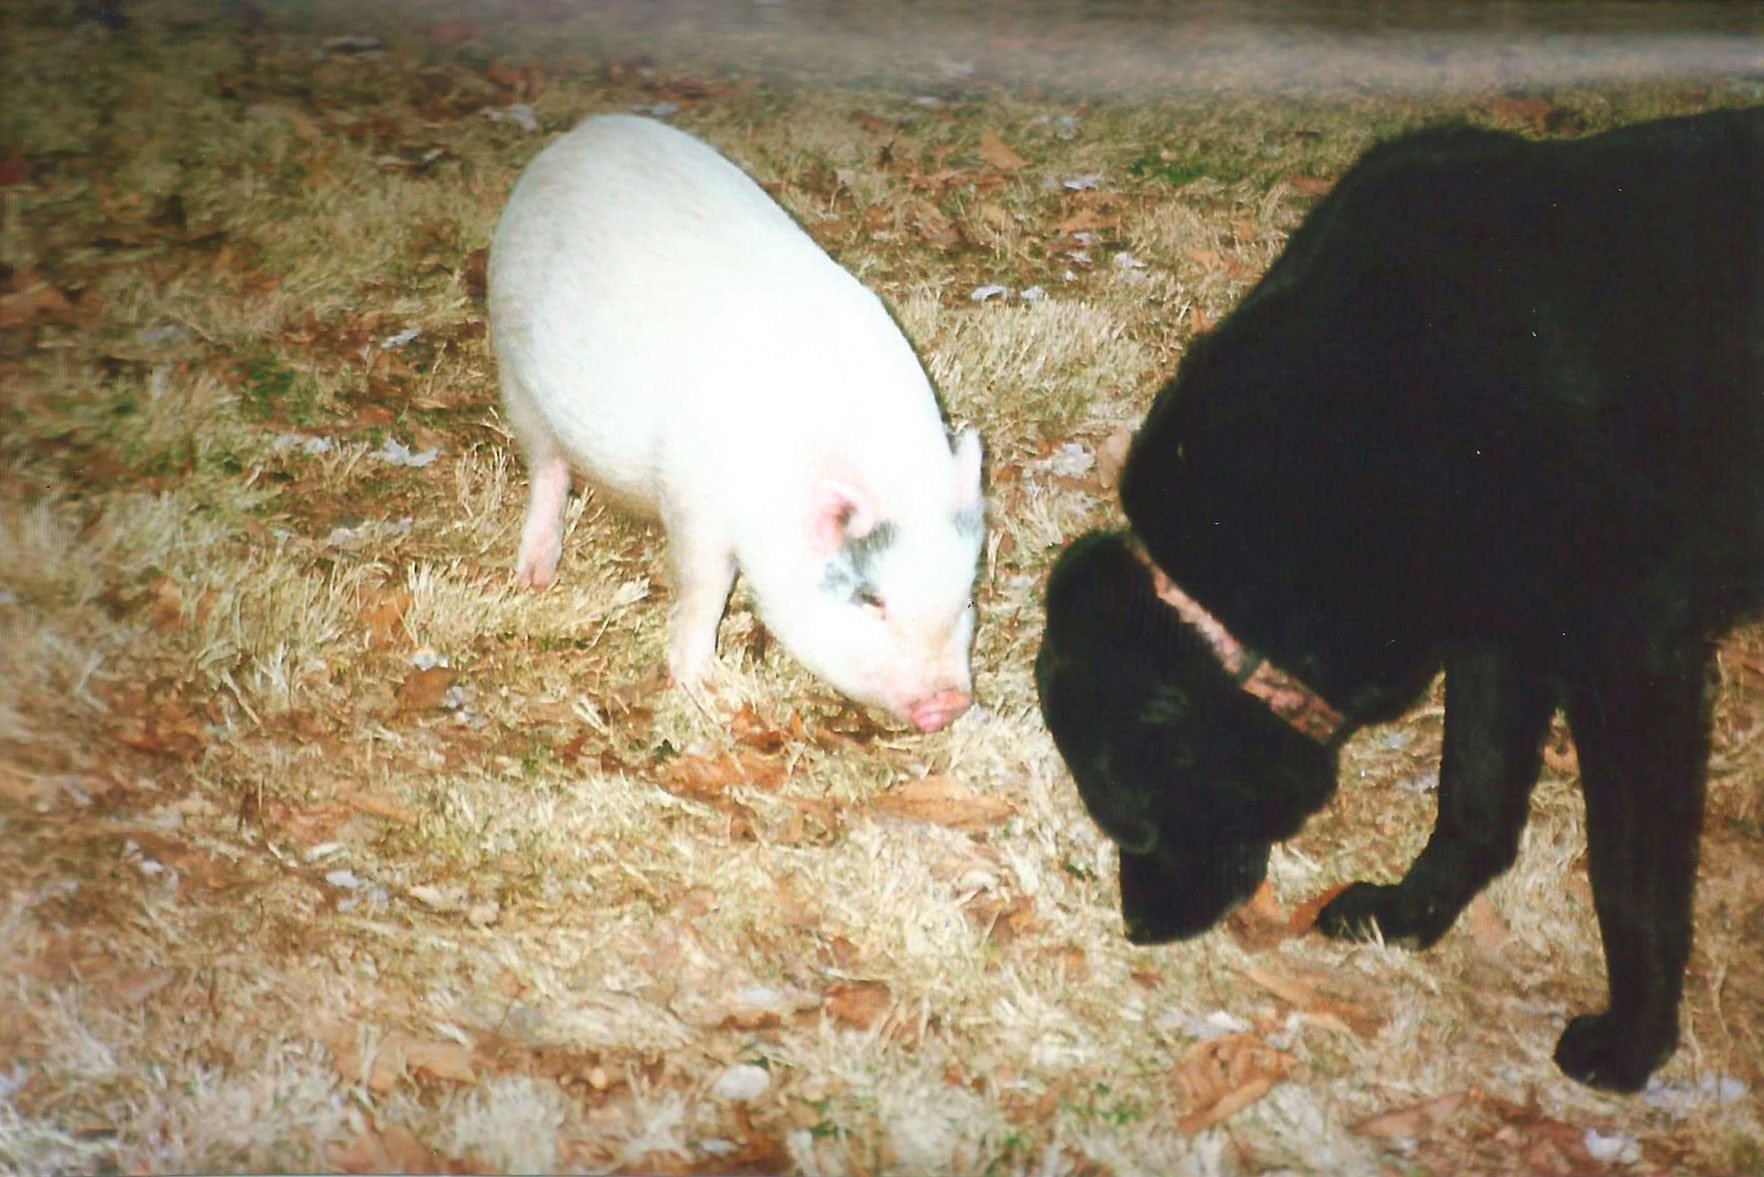 How One Pig Became a Town Mascot, and the Best Friend She Made Along the Way